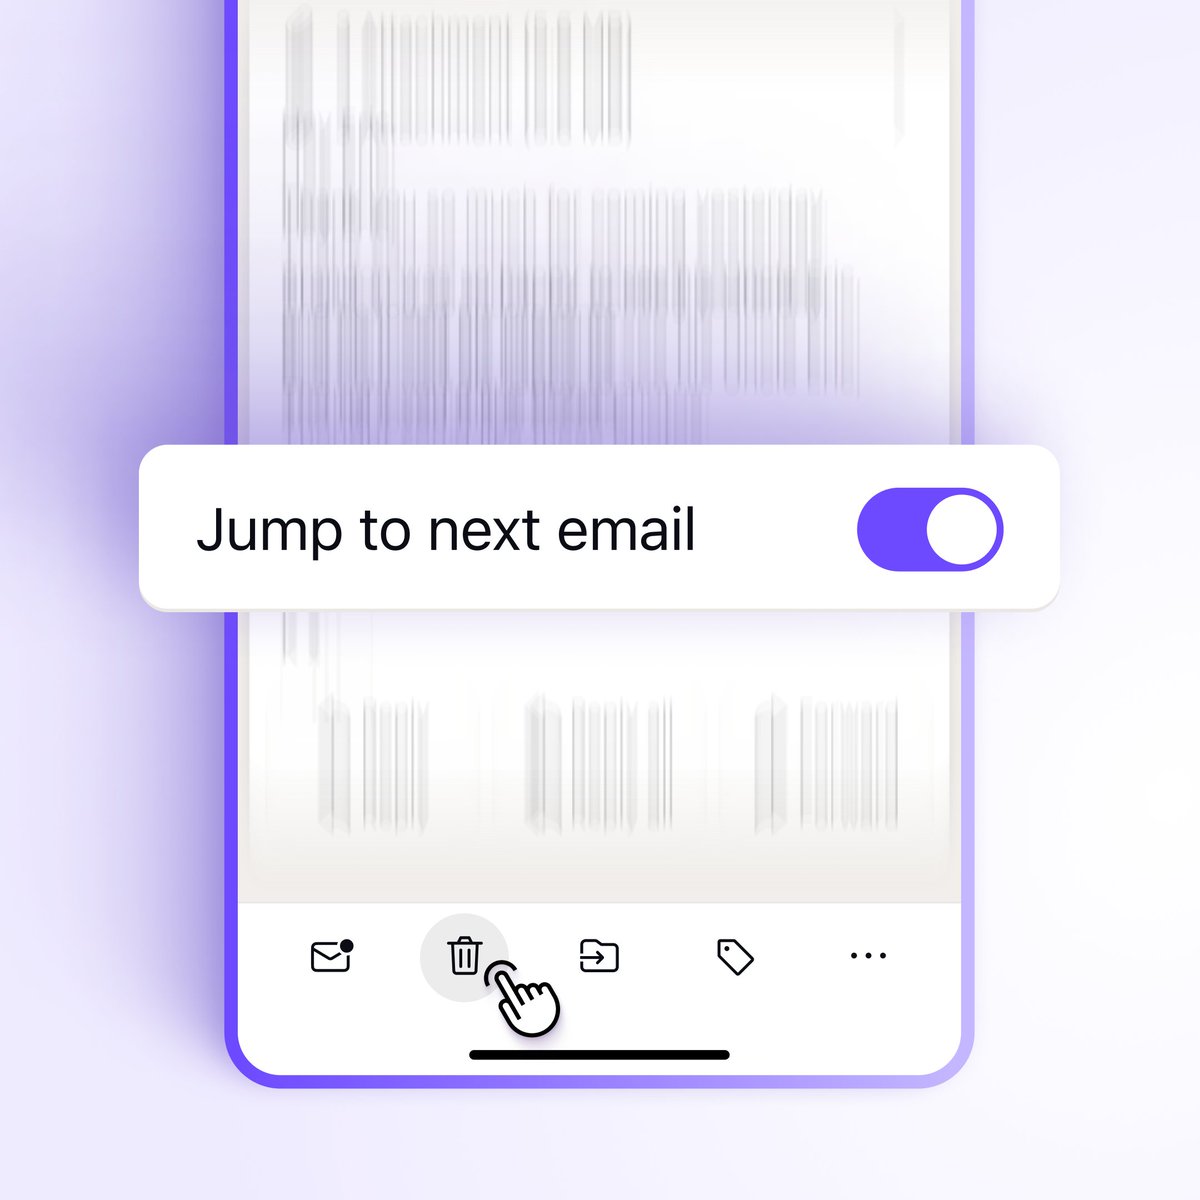 Another new #productivity feature on #ProtonMail for #iOS! ▶️ You can now go through your unread emails faster – when you take action on one email, the next one will be shown automatically. You can enable this feature from the app Settings (“Jump to next email”).